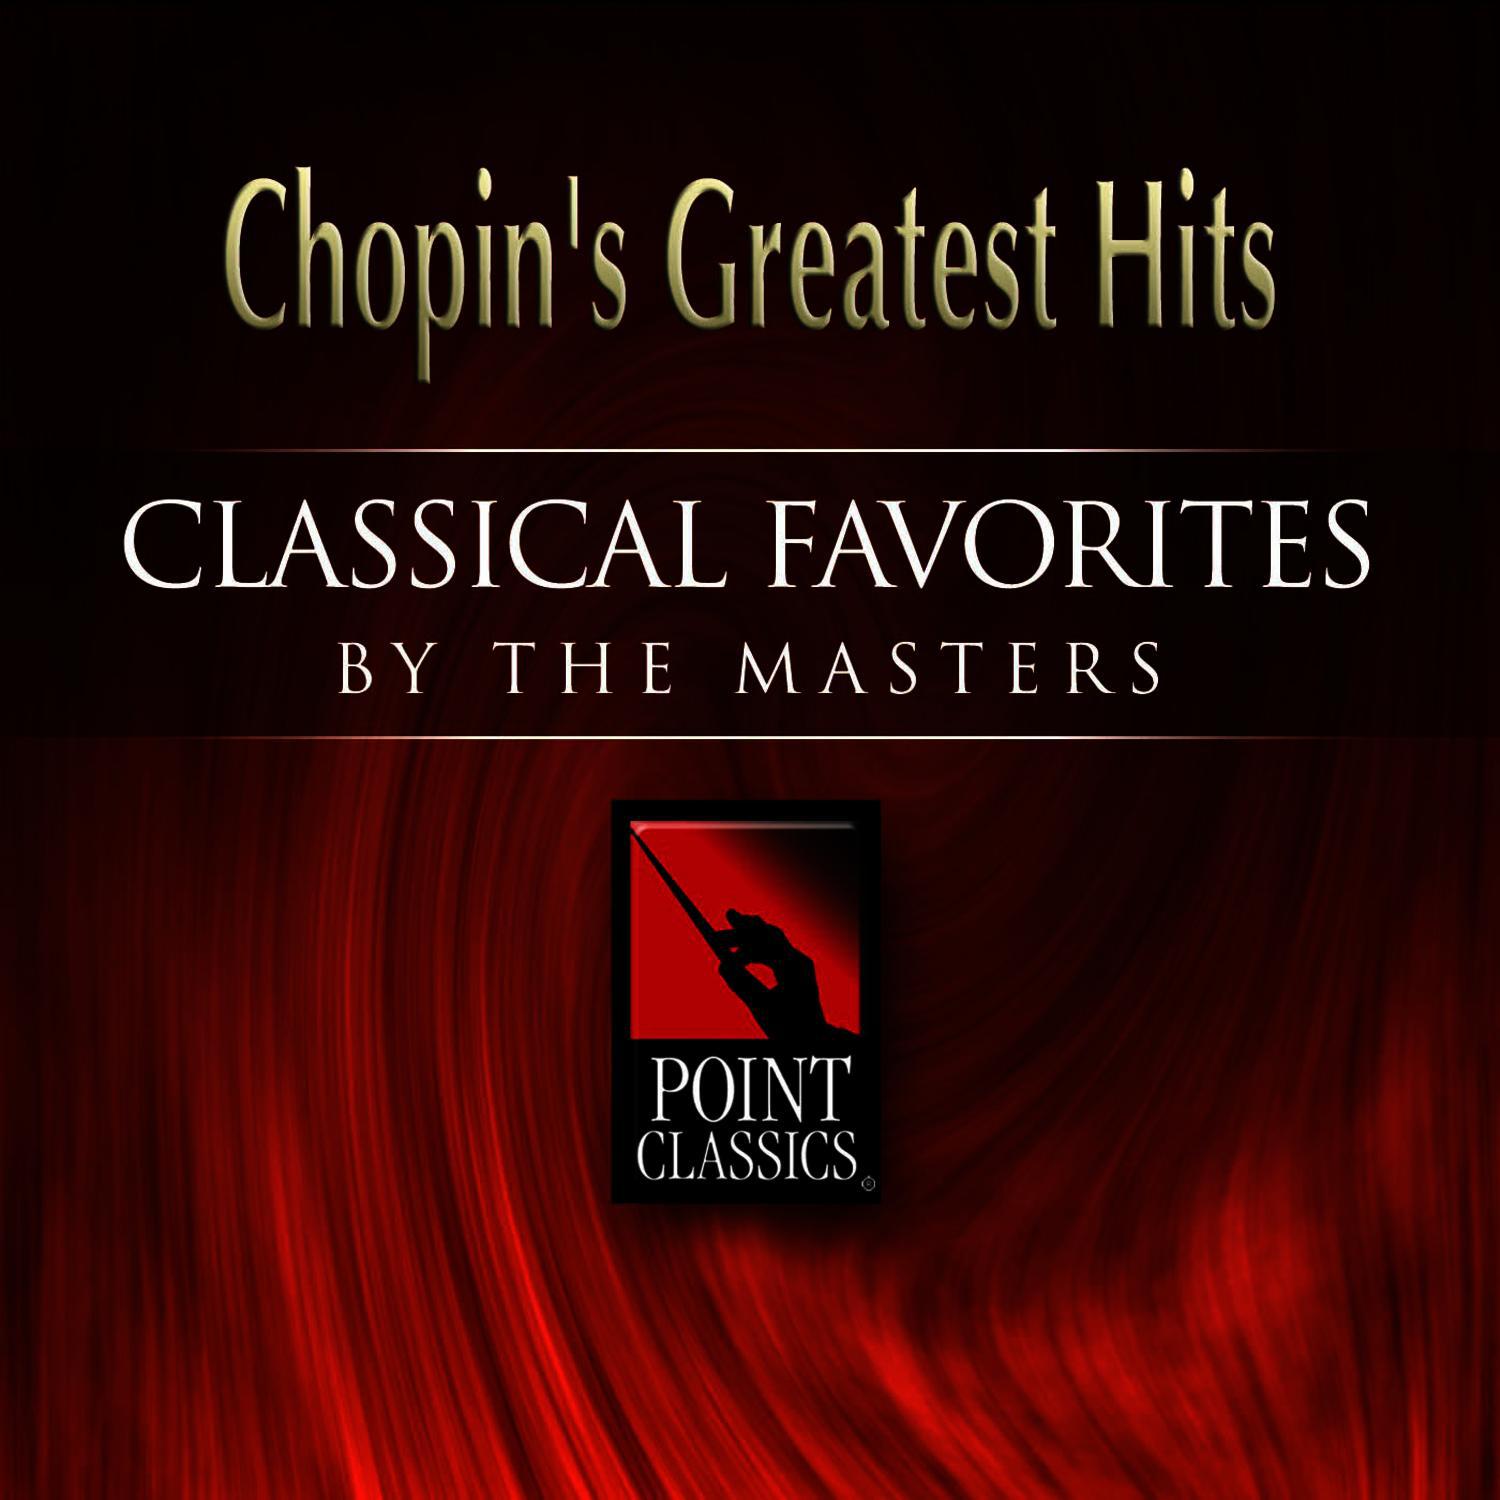 Chopin's Greatest Hits